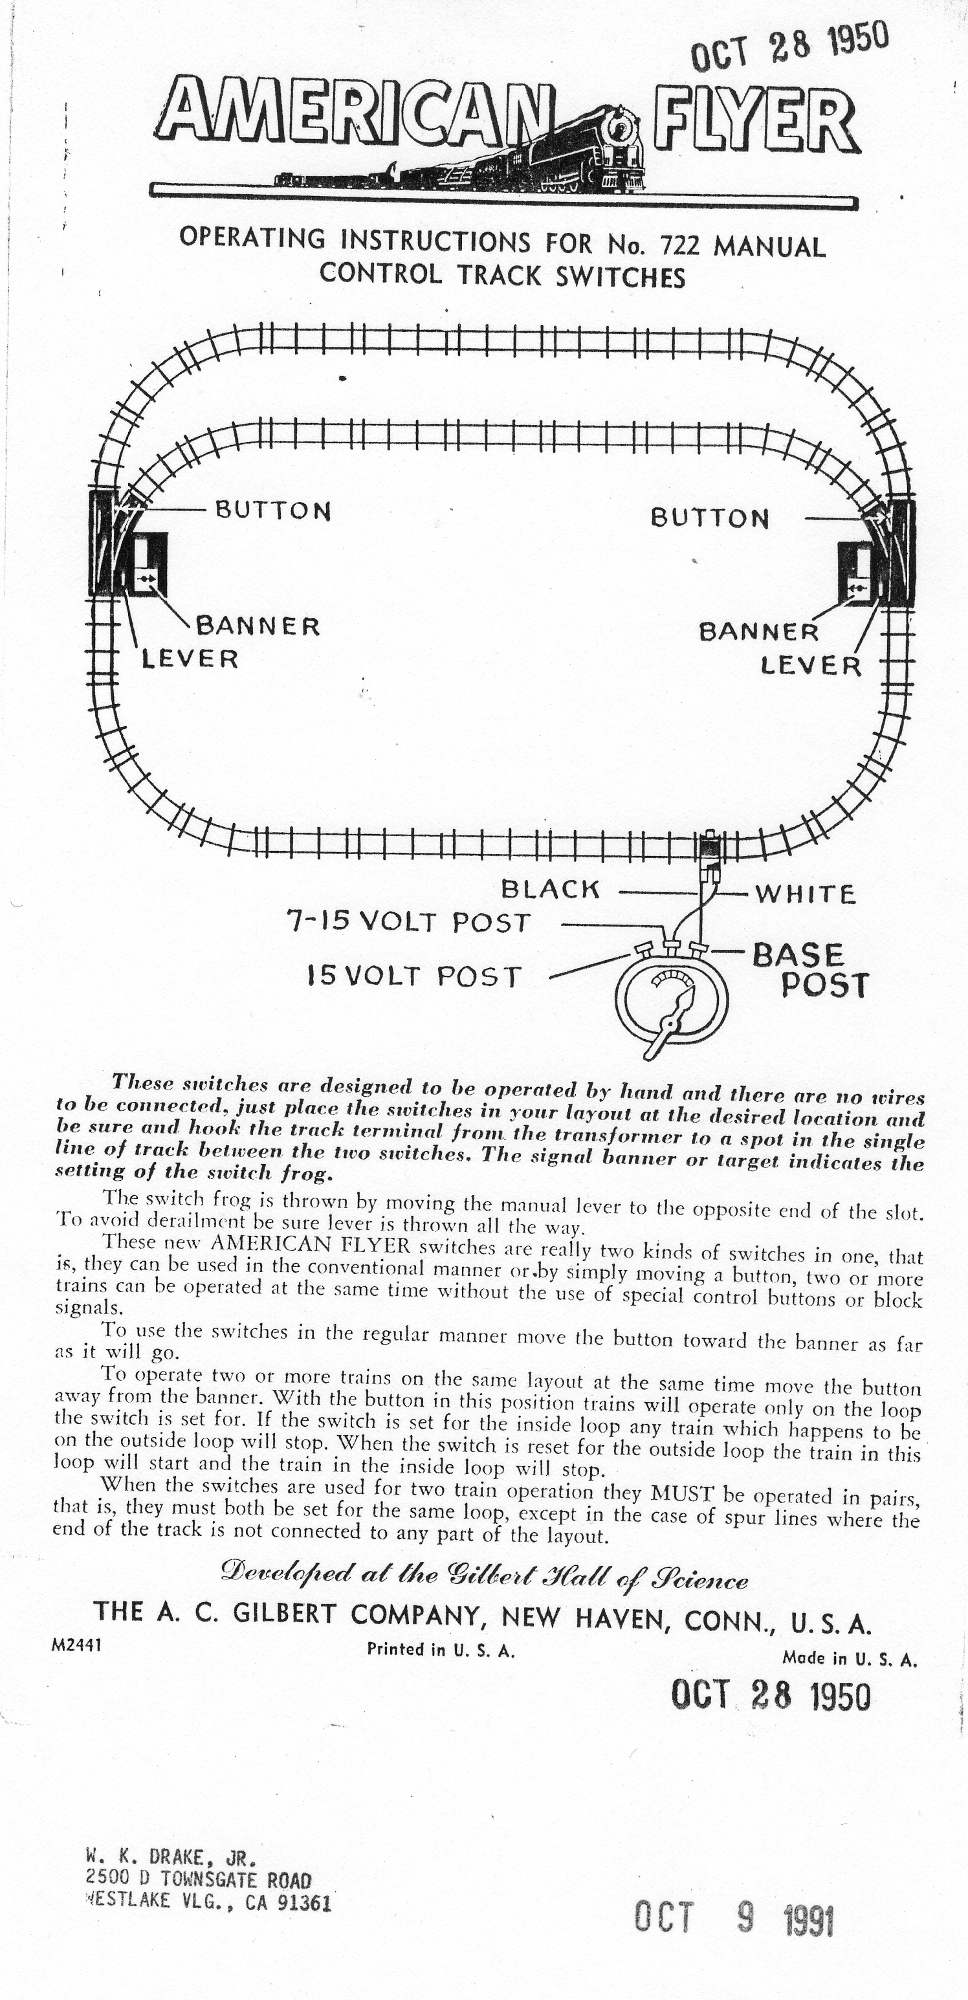 Operating Instructions For No. 722 Manual Control Track Switches